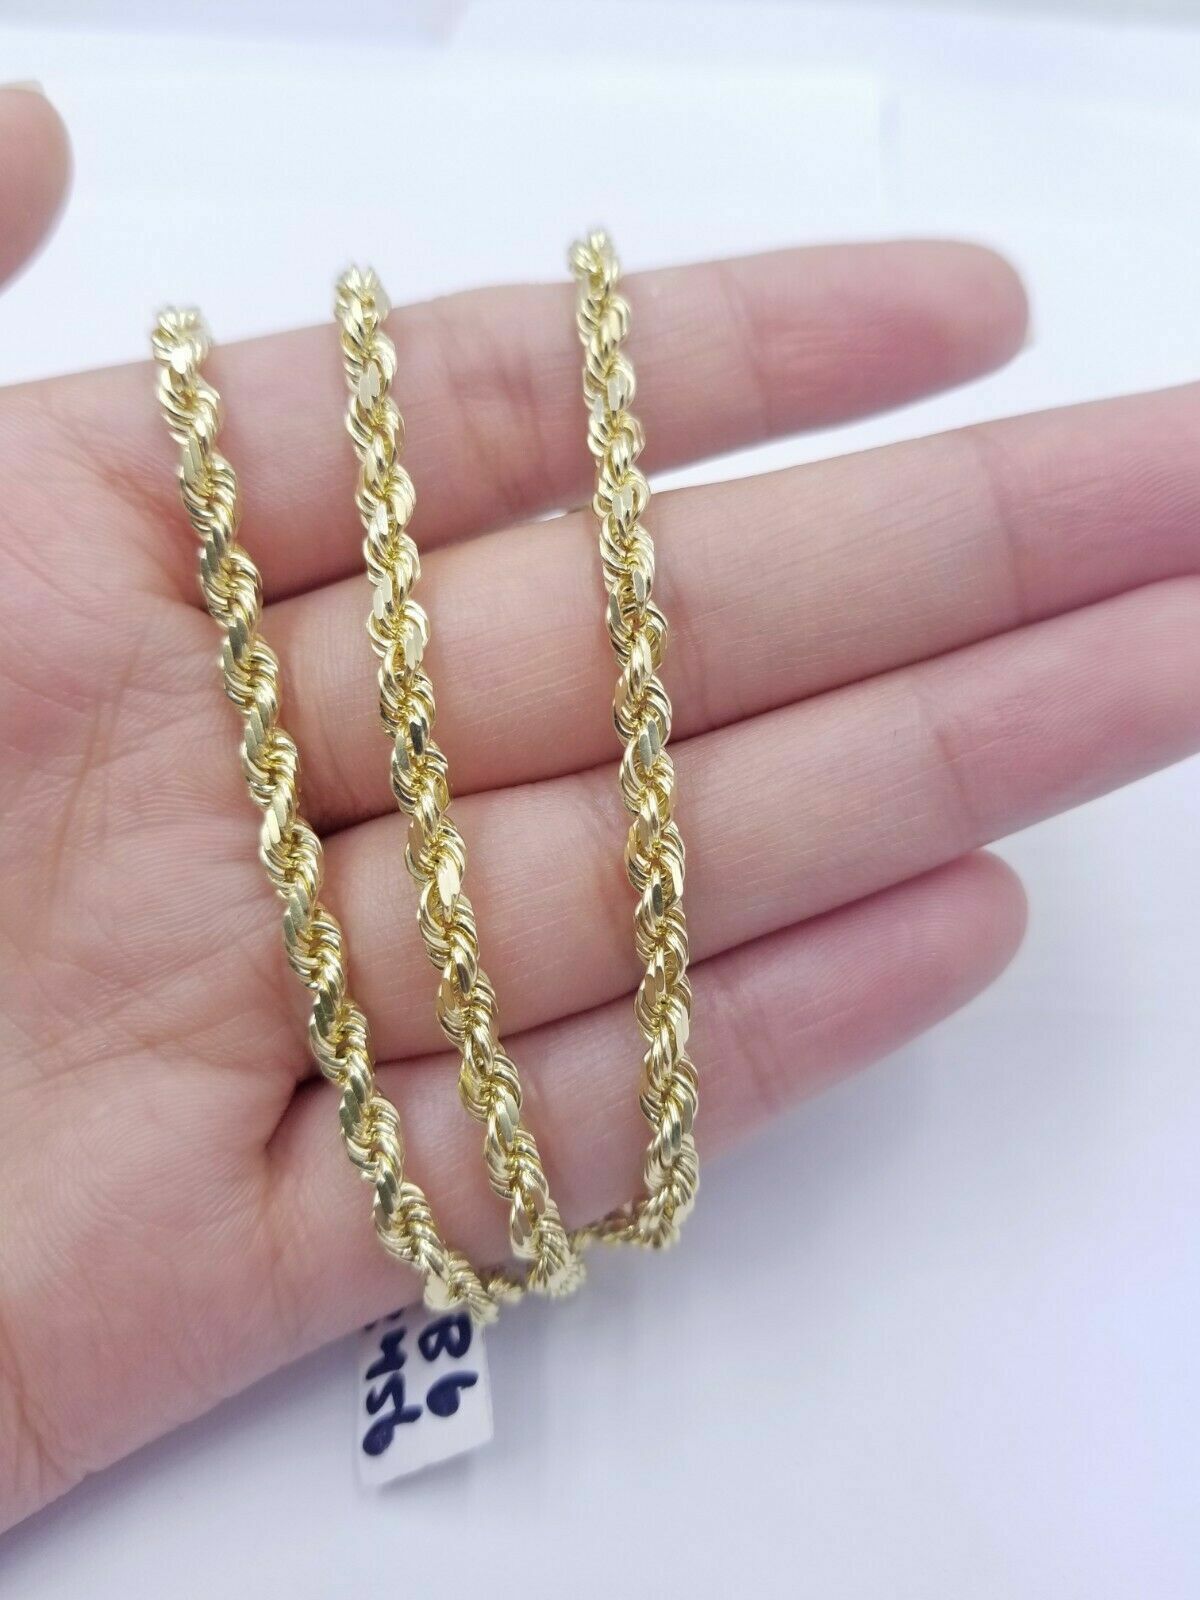 10k Yellow Gold Rope Chain Necklace 18"-30" Men Women 4mm-10mm Real Gold Hollow